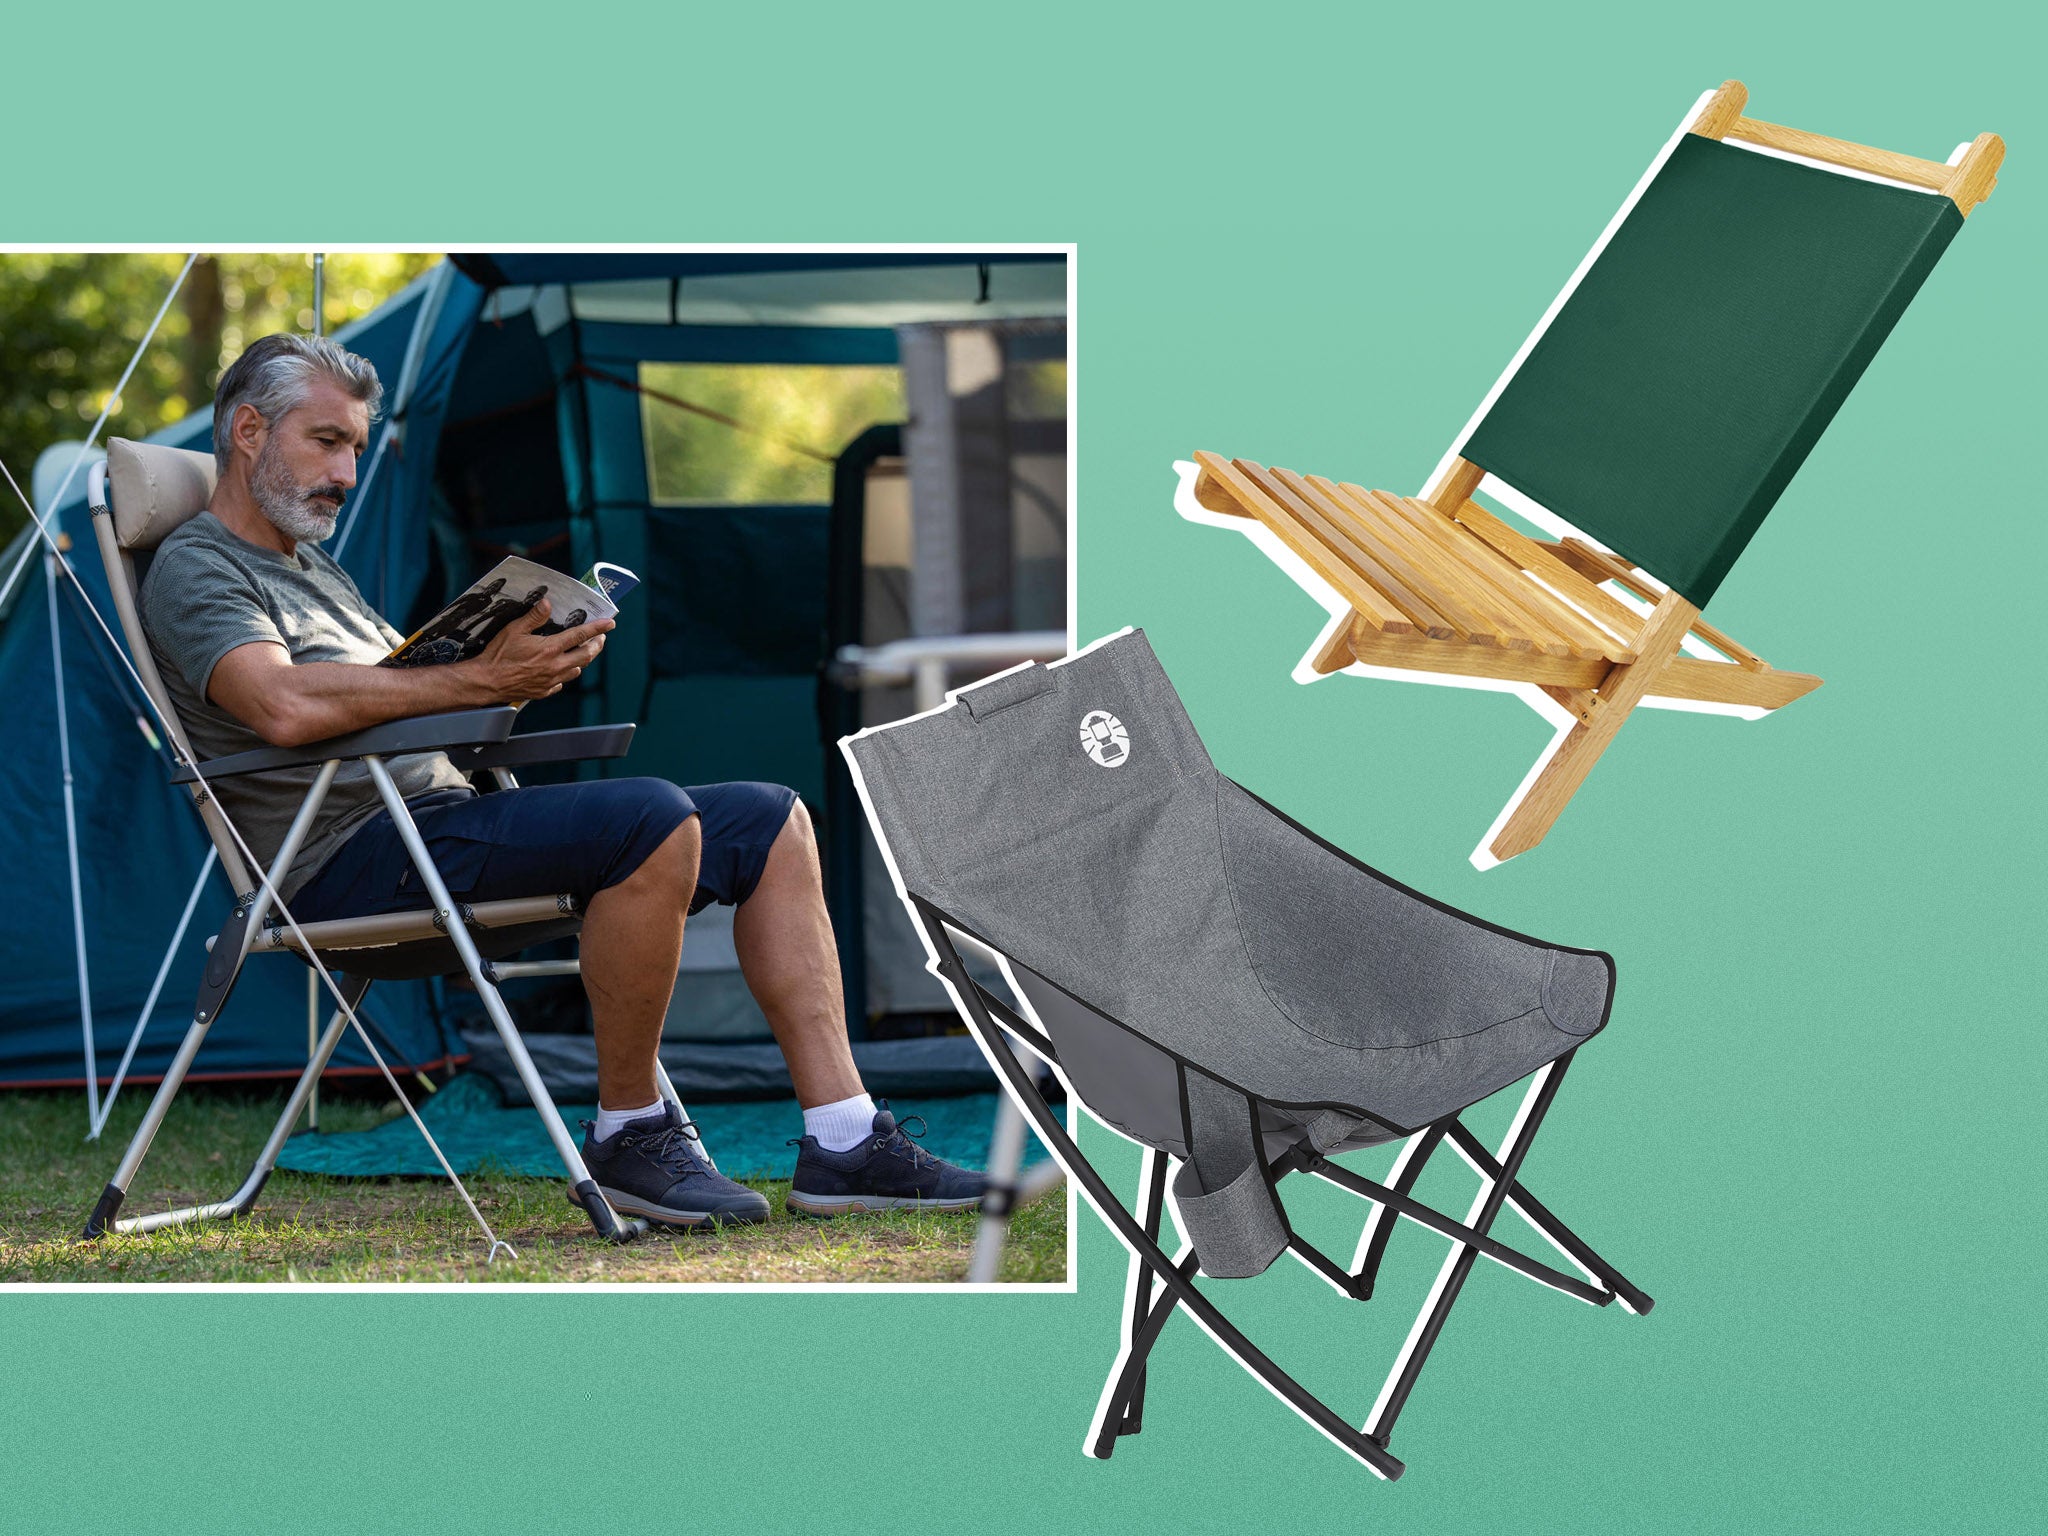 https://static.independent.co.uk/2023/04/19/12/best%20camping%20chairs2%20copy-2.jpg